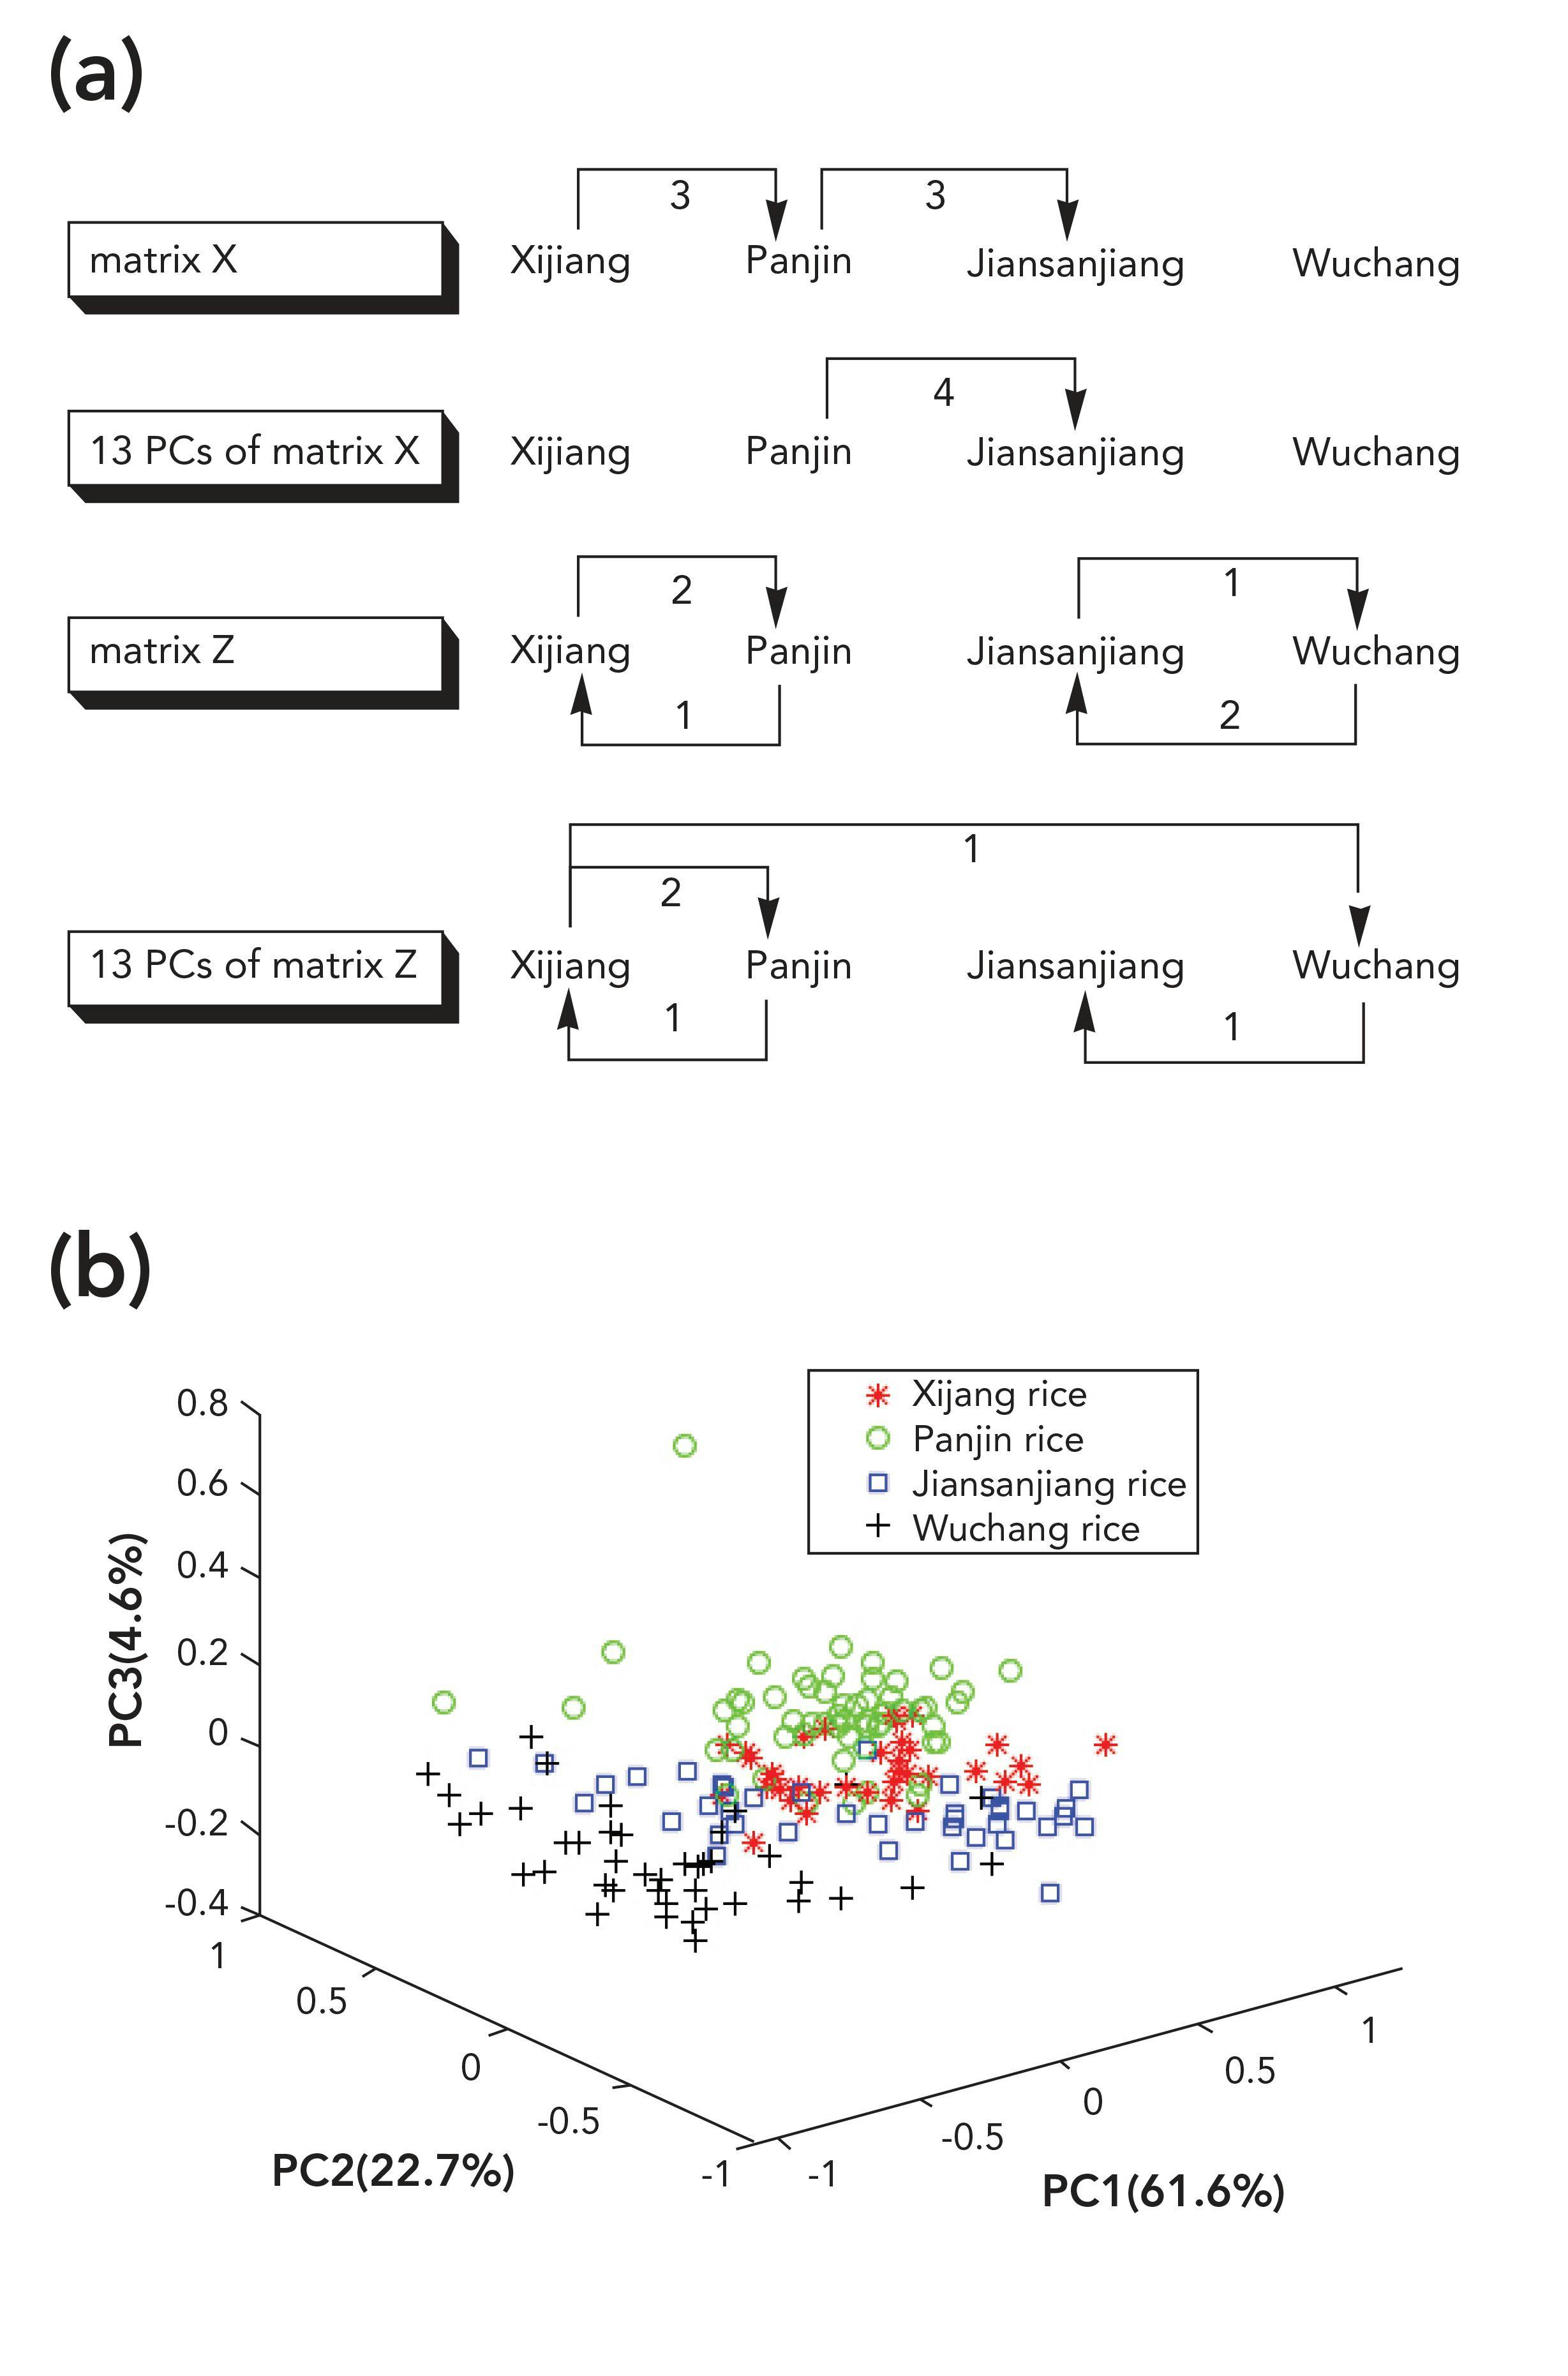 FIGURE 3: (a) Details of misclassified rice samples by Raman spectroscopy (b) Distribution of rice samples in the multidimensional principal component analysis (PCA) space formed by the first three PCs of mid-IR spectra.